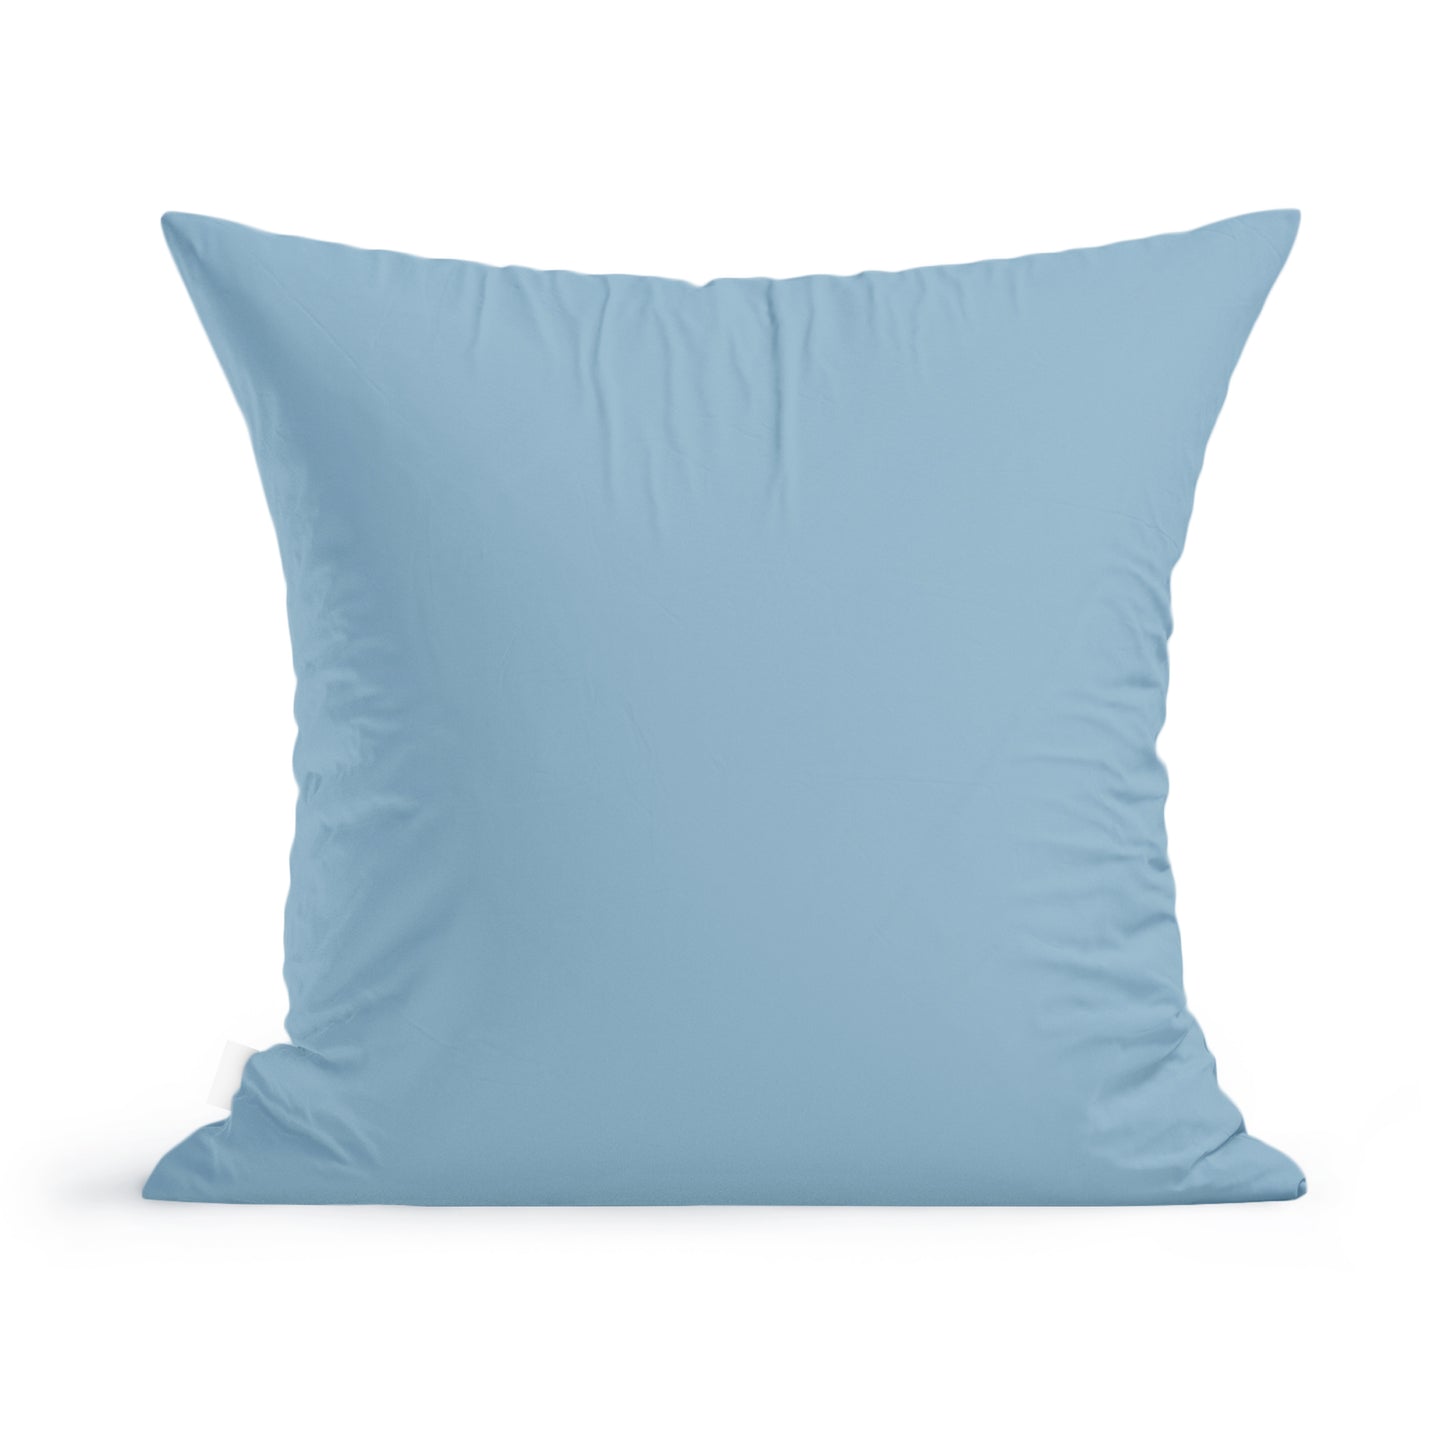 Fresh Florals Pillow in light blue cotton, isolated on a white background by Rustic County.